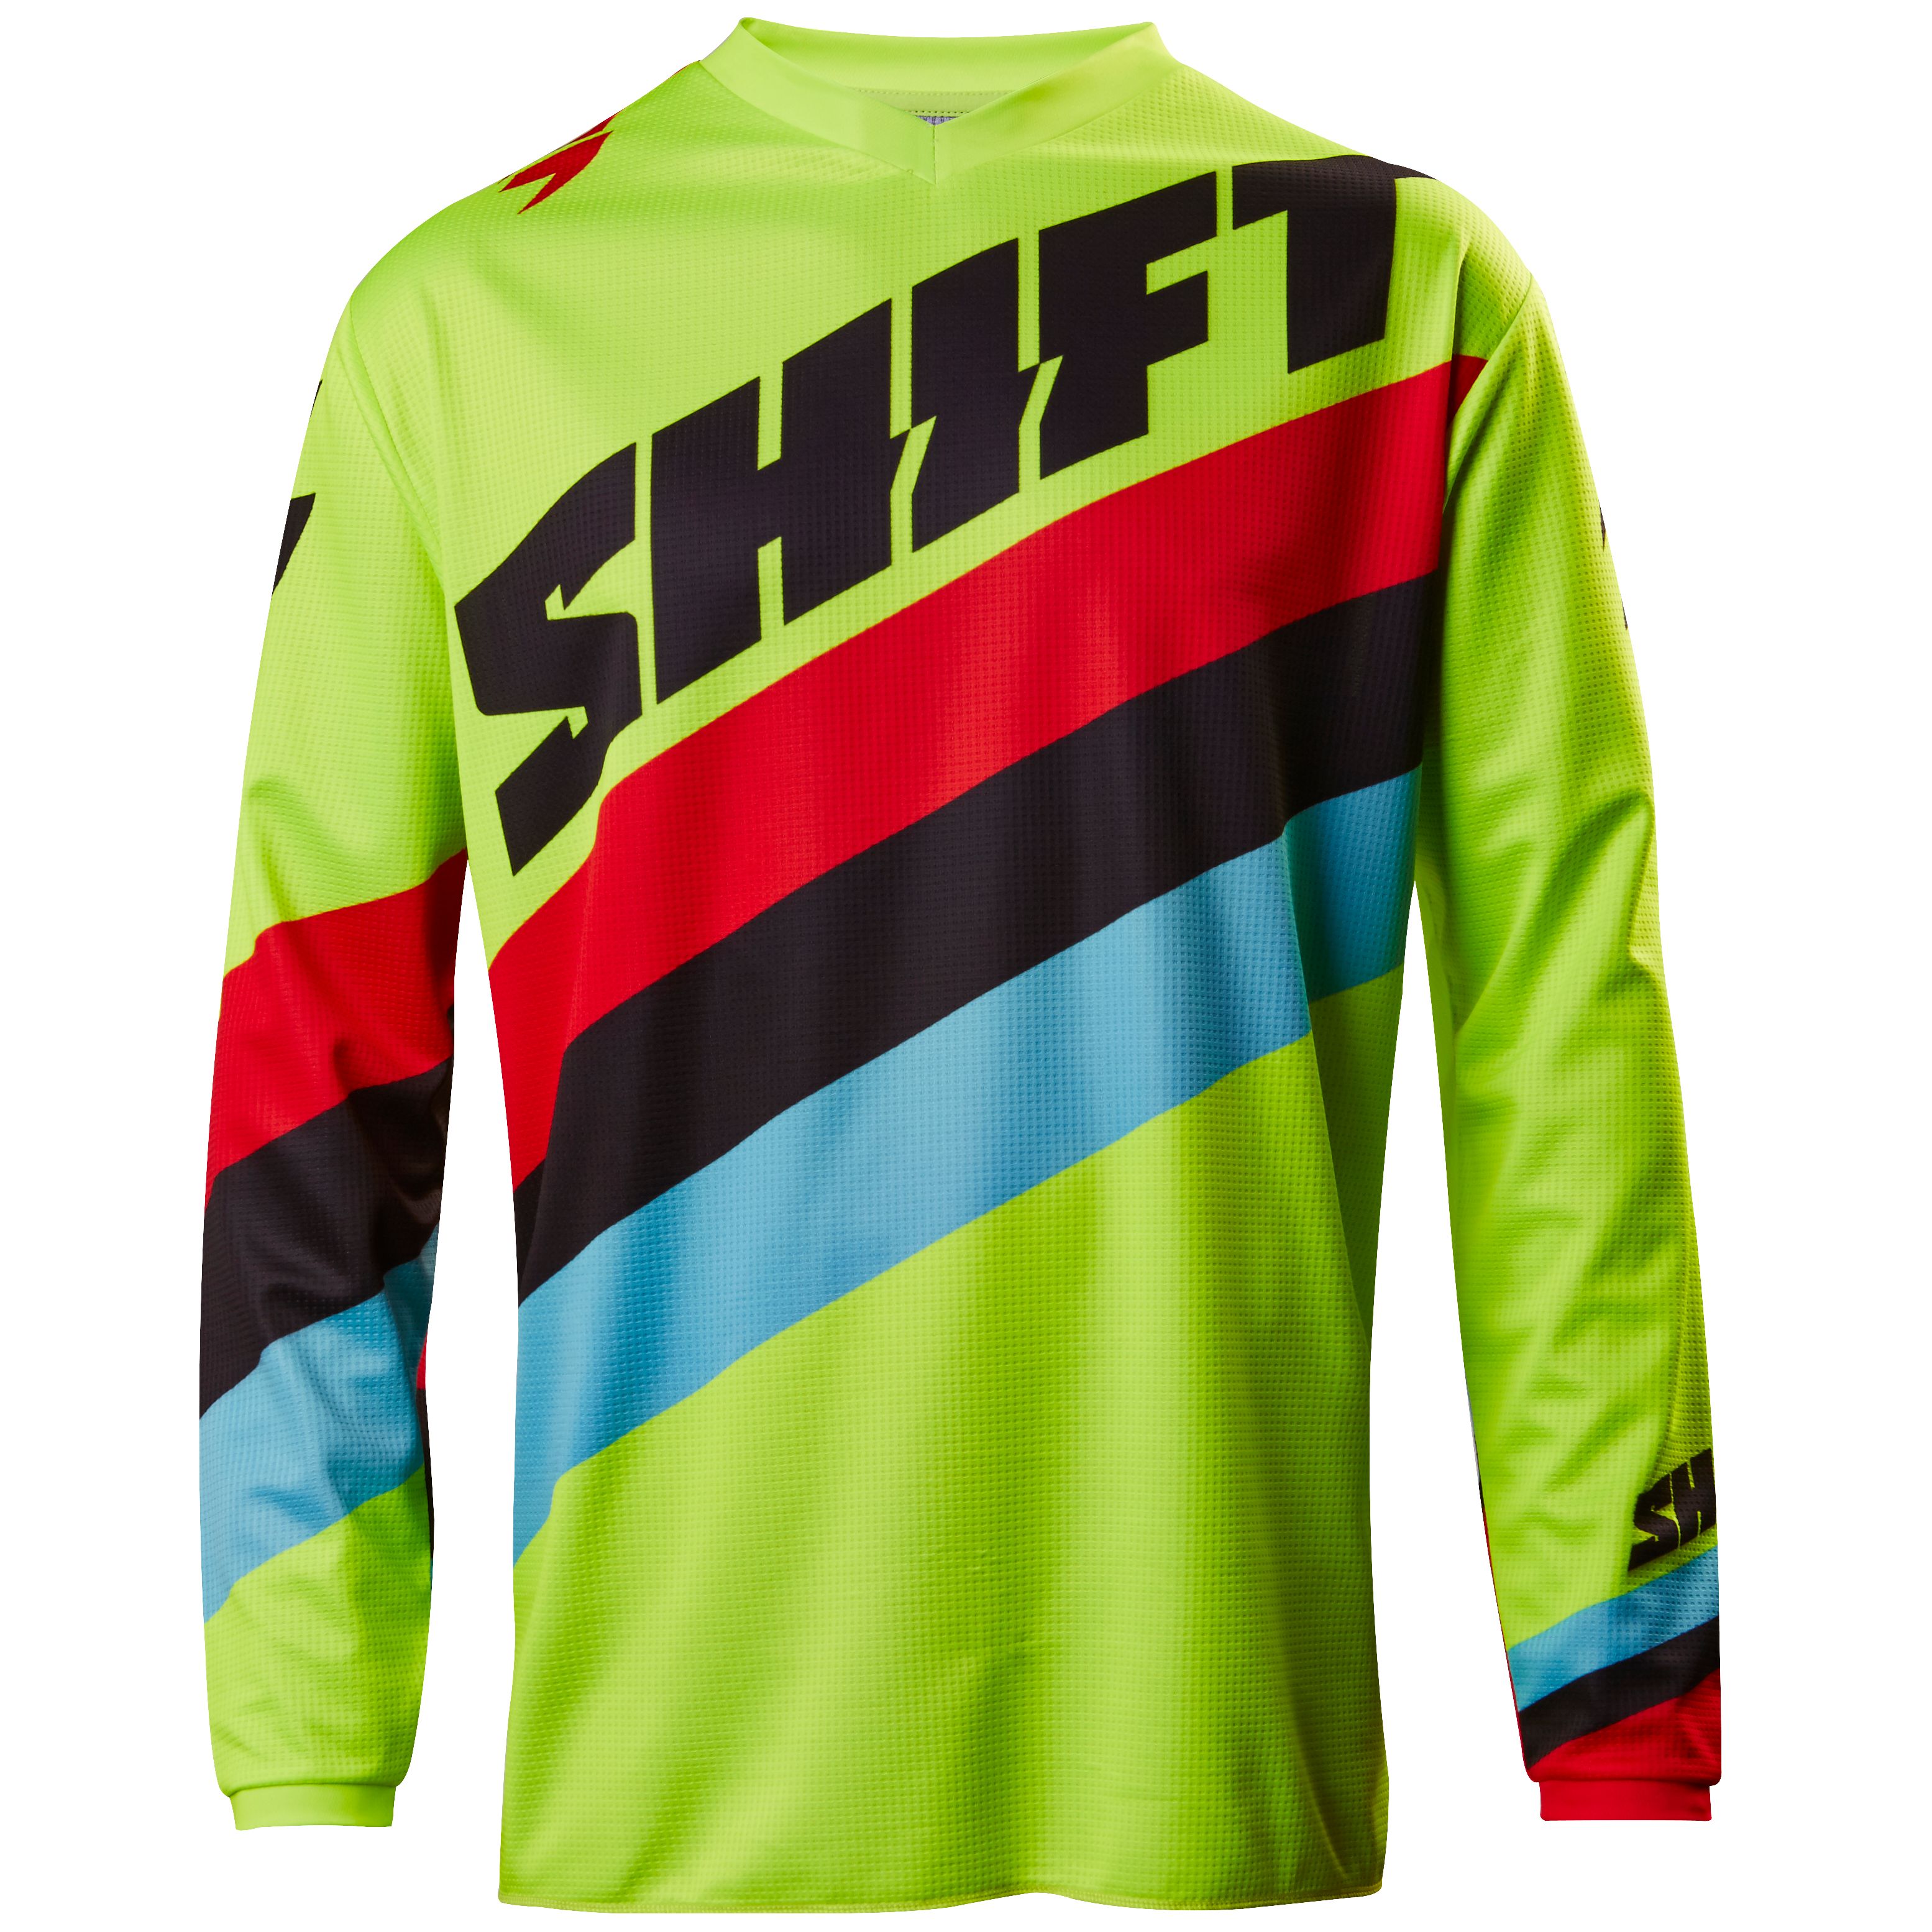 Maillot Cross Shift Youth Whit3 Tarmac 2017 - Jaune Fluo